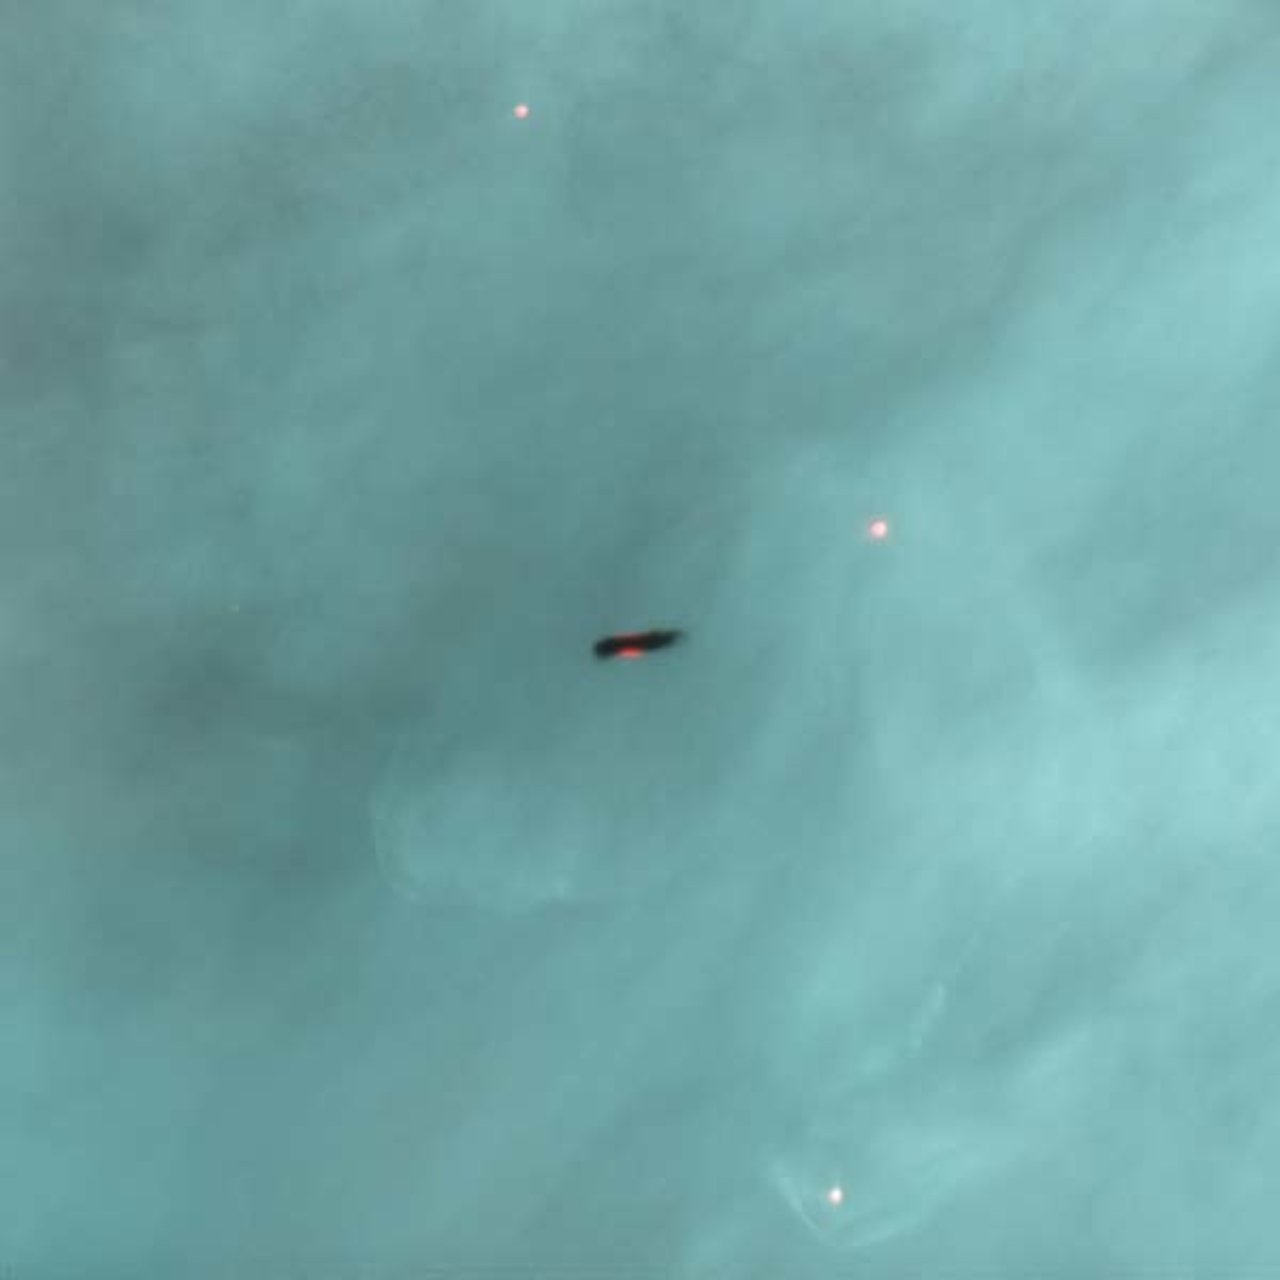 Edge-on disc in the Orion Nebula